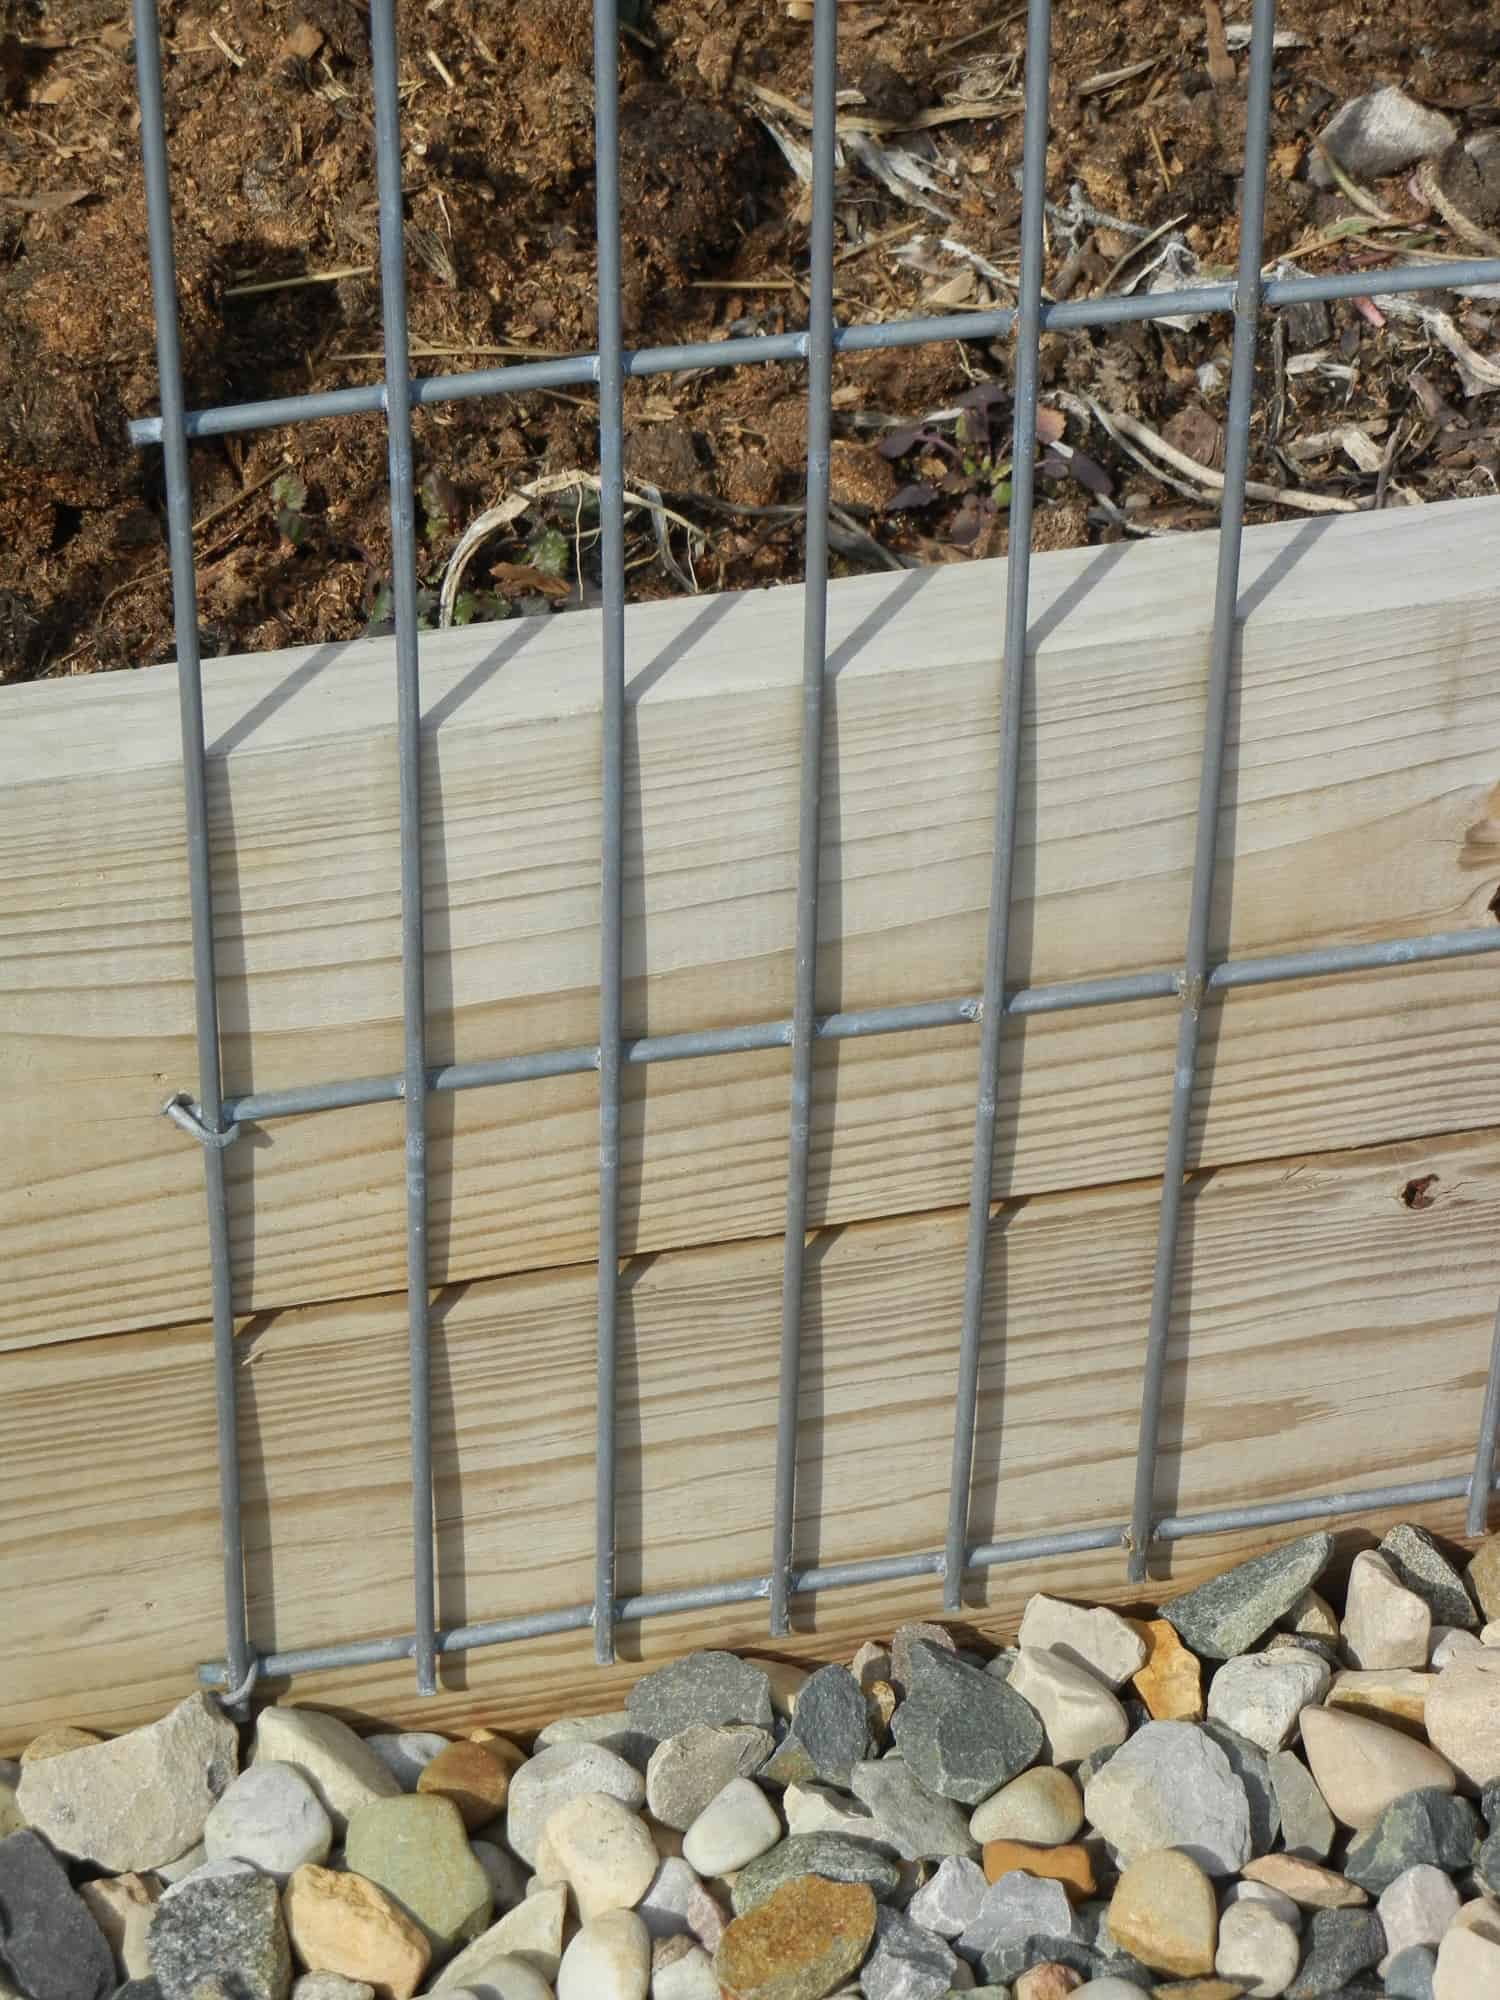 Building A Strong Wind & Weather-Resistant Trellis. 3" galvanized or exterior nails to fasten down the cattle panels